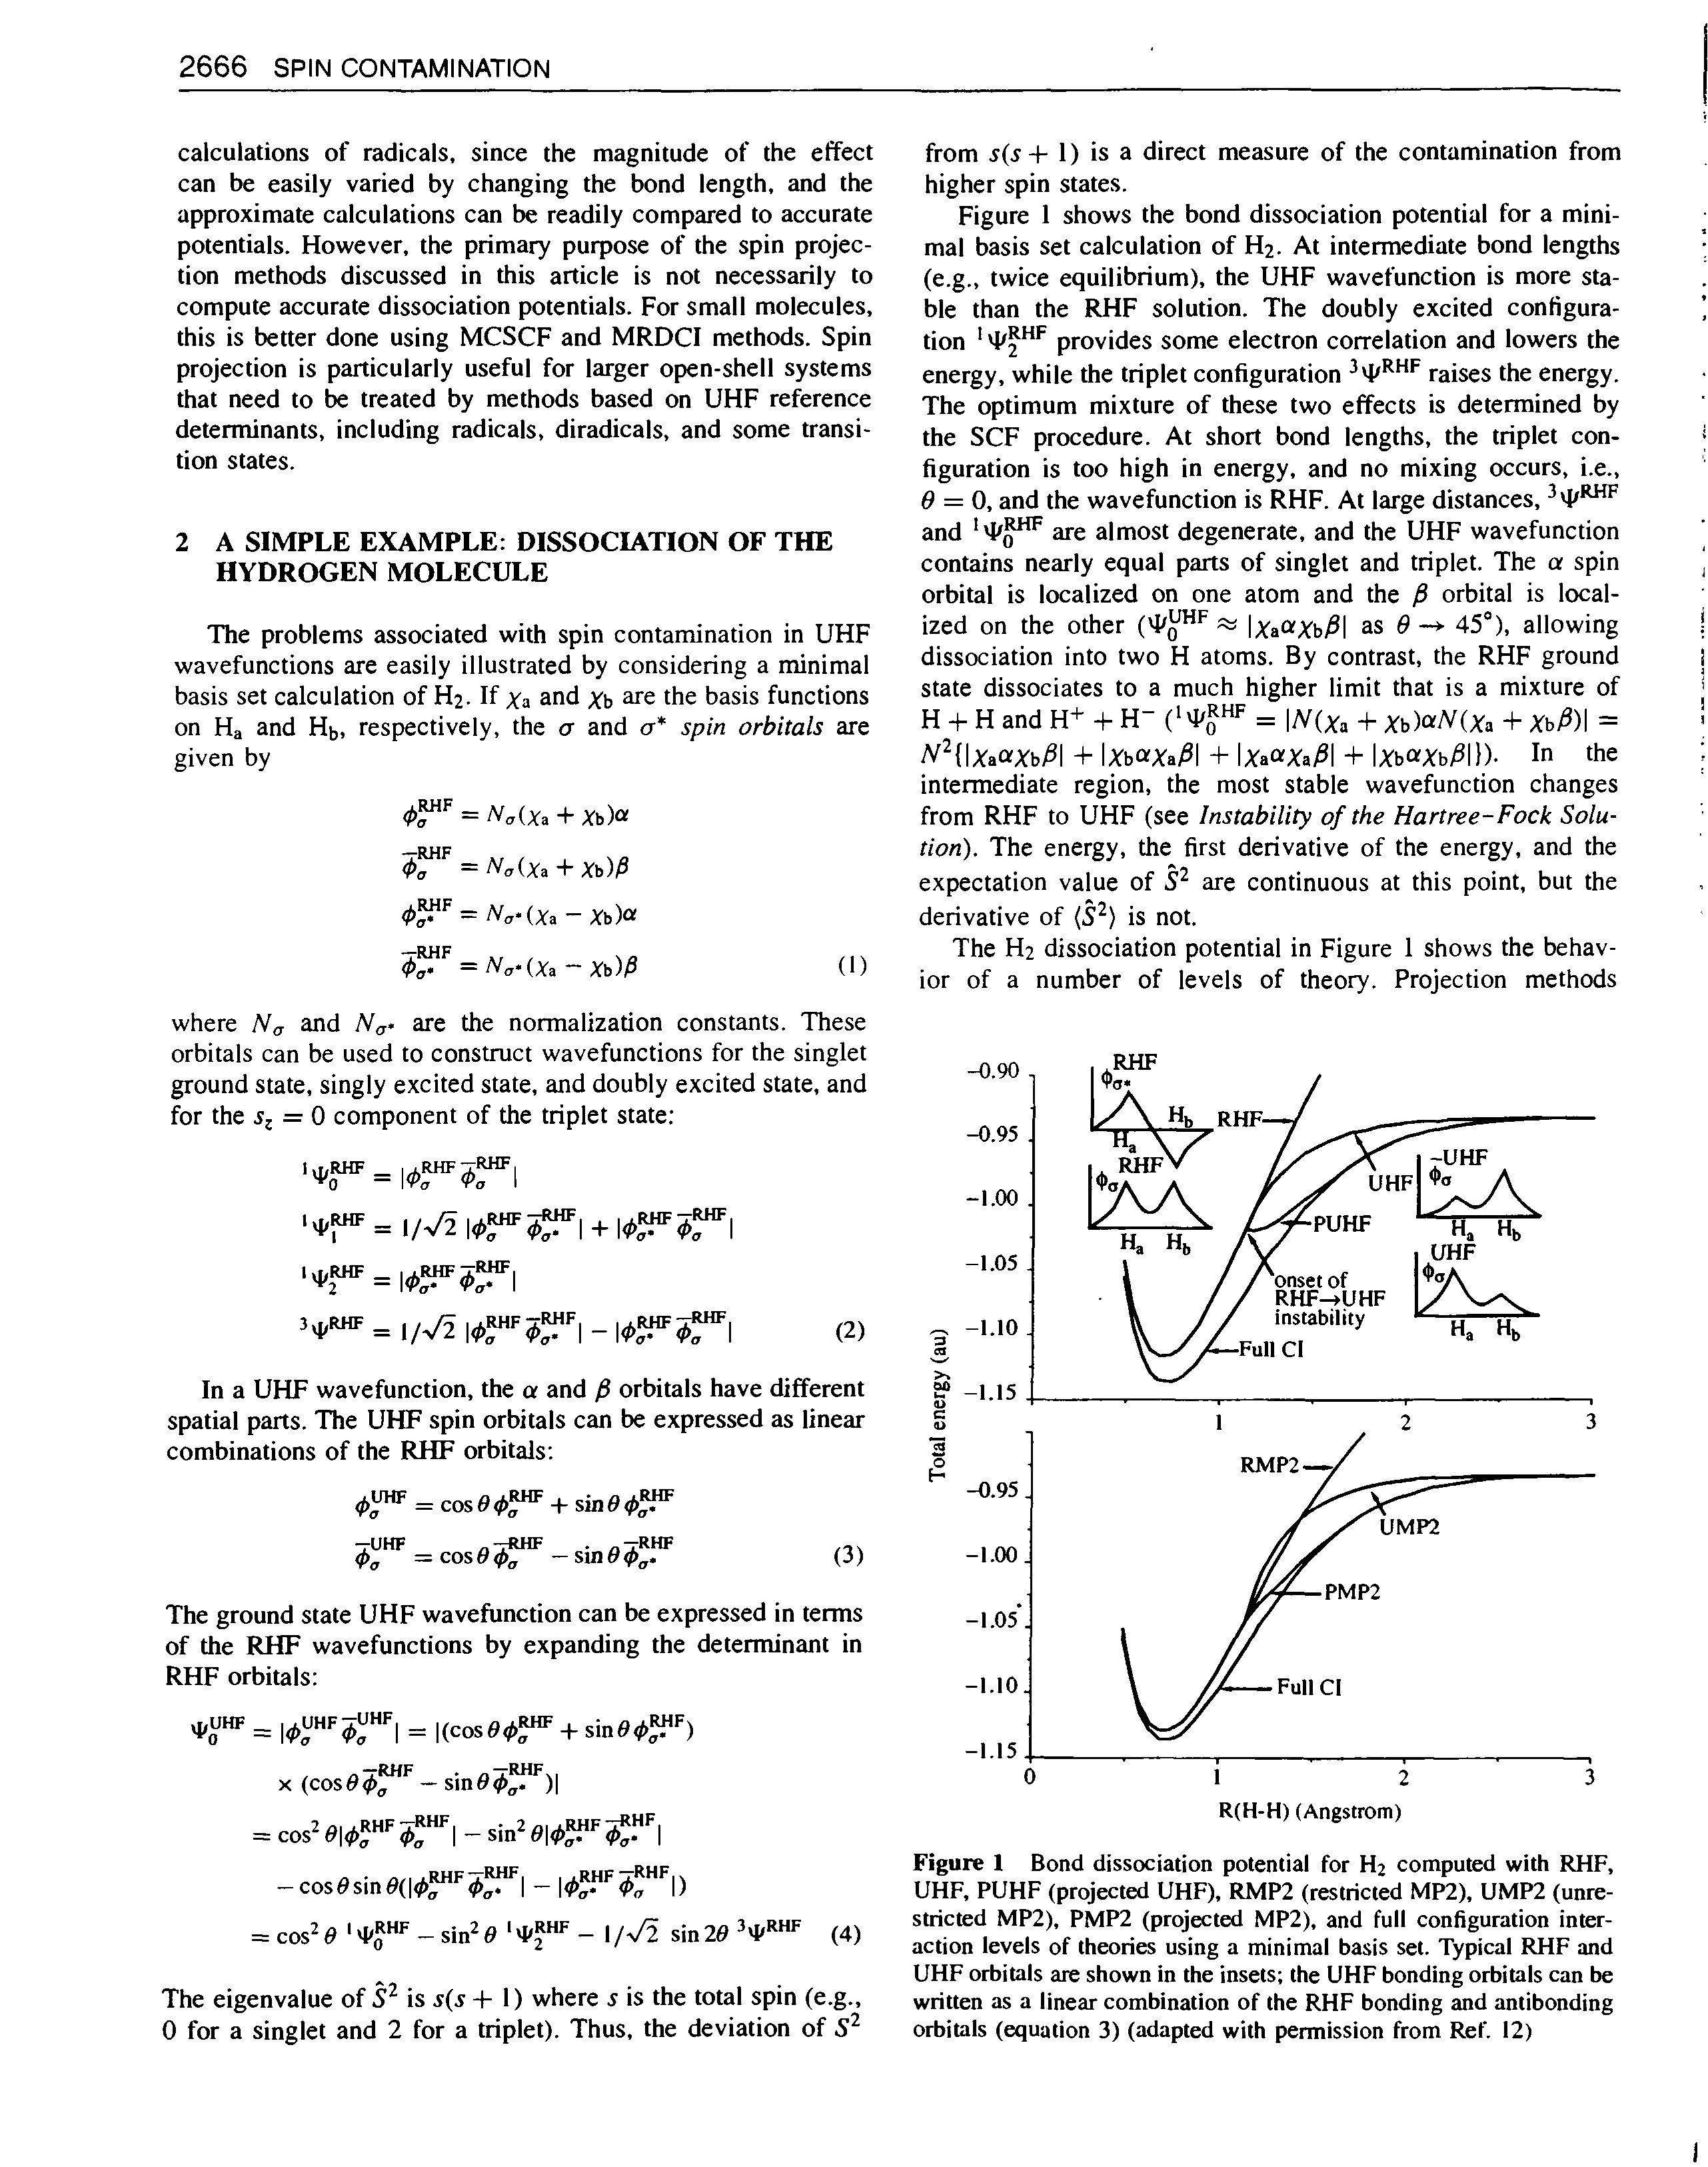 Figure 1 Bond dissociation potential for H2 computed with RHF, UHF, PUHF (projected UHF), RMP2 (restricted MP2), UMP2 (unrestricted MP2), PMP2 (projected MP2), and full configuration interaction levels of theories using a minimal basis set. Typical RHF and UHF orbitals are shown in the insets the UHF bonding orbitals can be written as a linear combination of the RHF bonding and antibonding orbitals (equation 3) (adapted with permission from Ref. 12)...